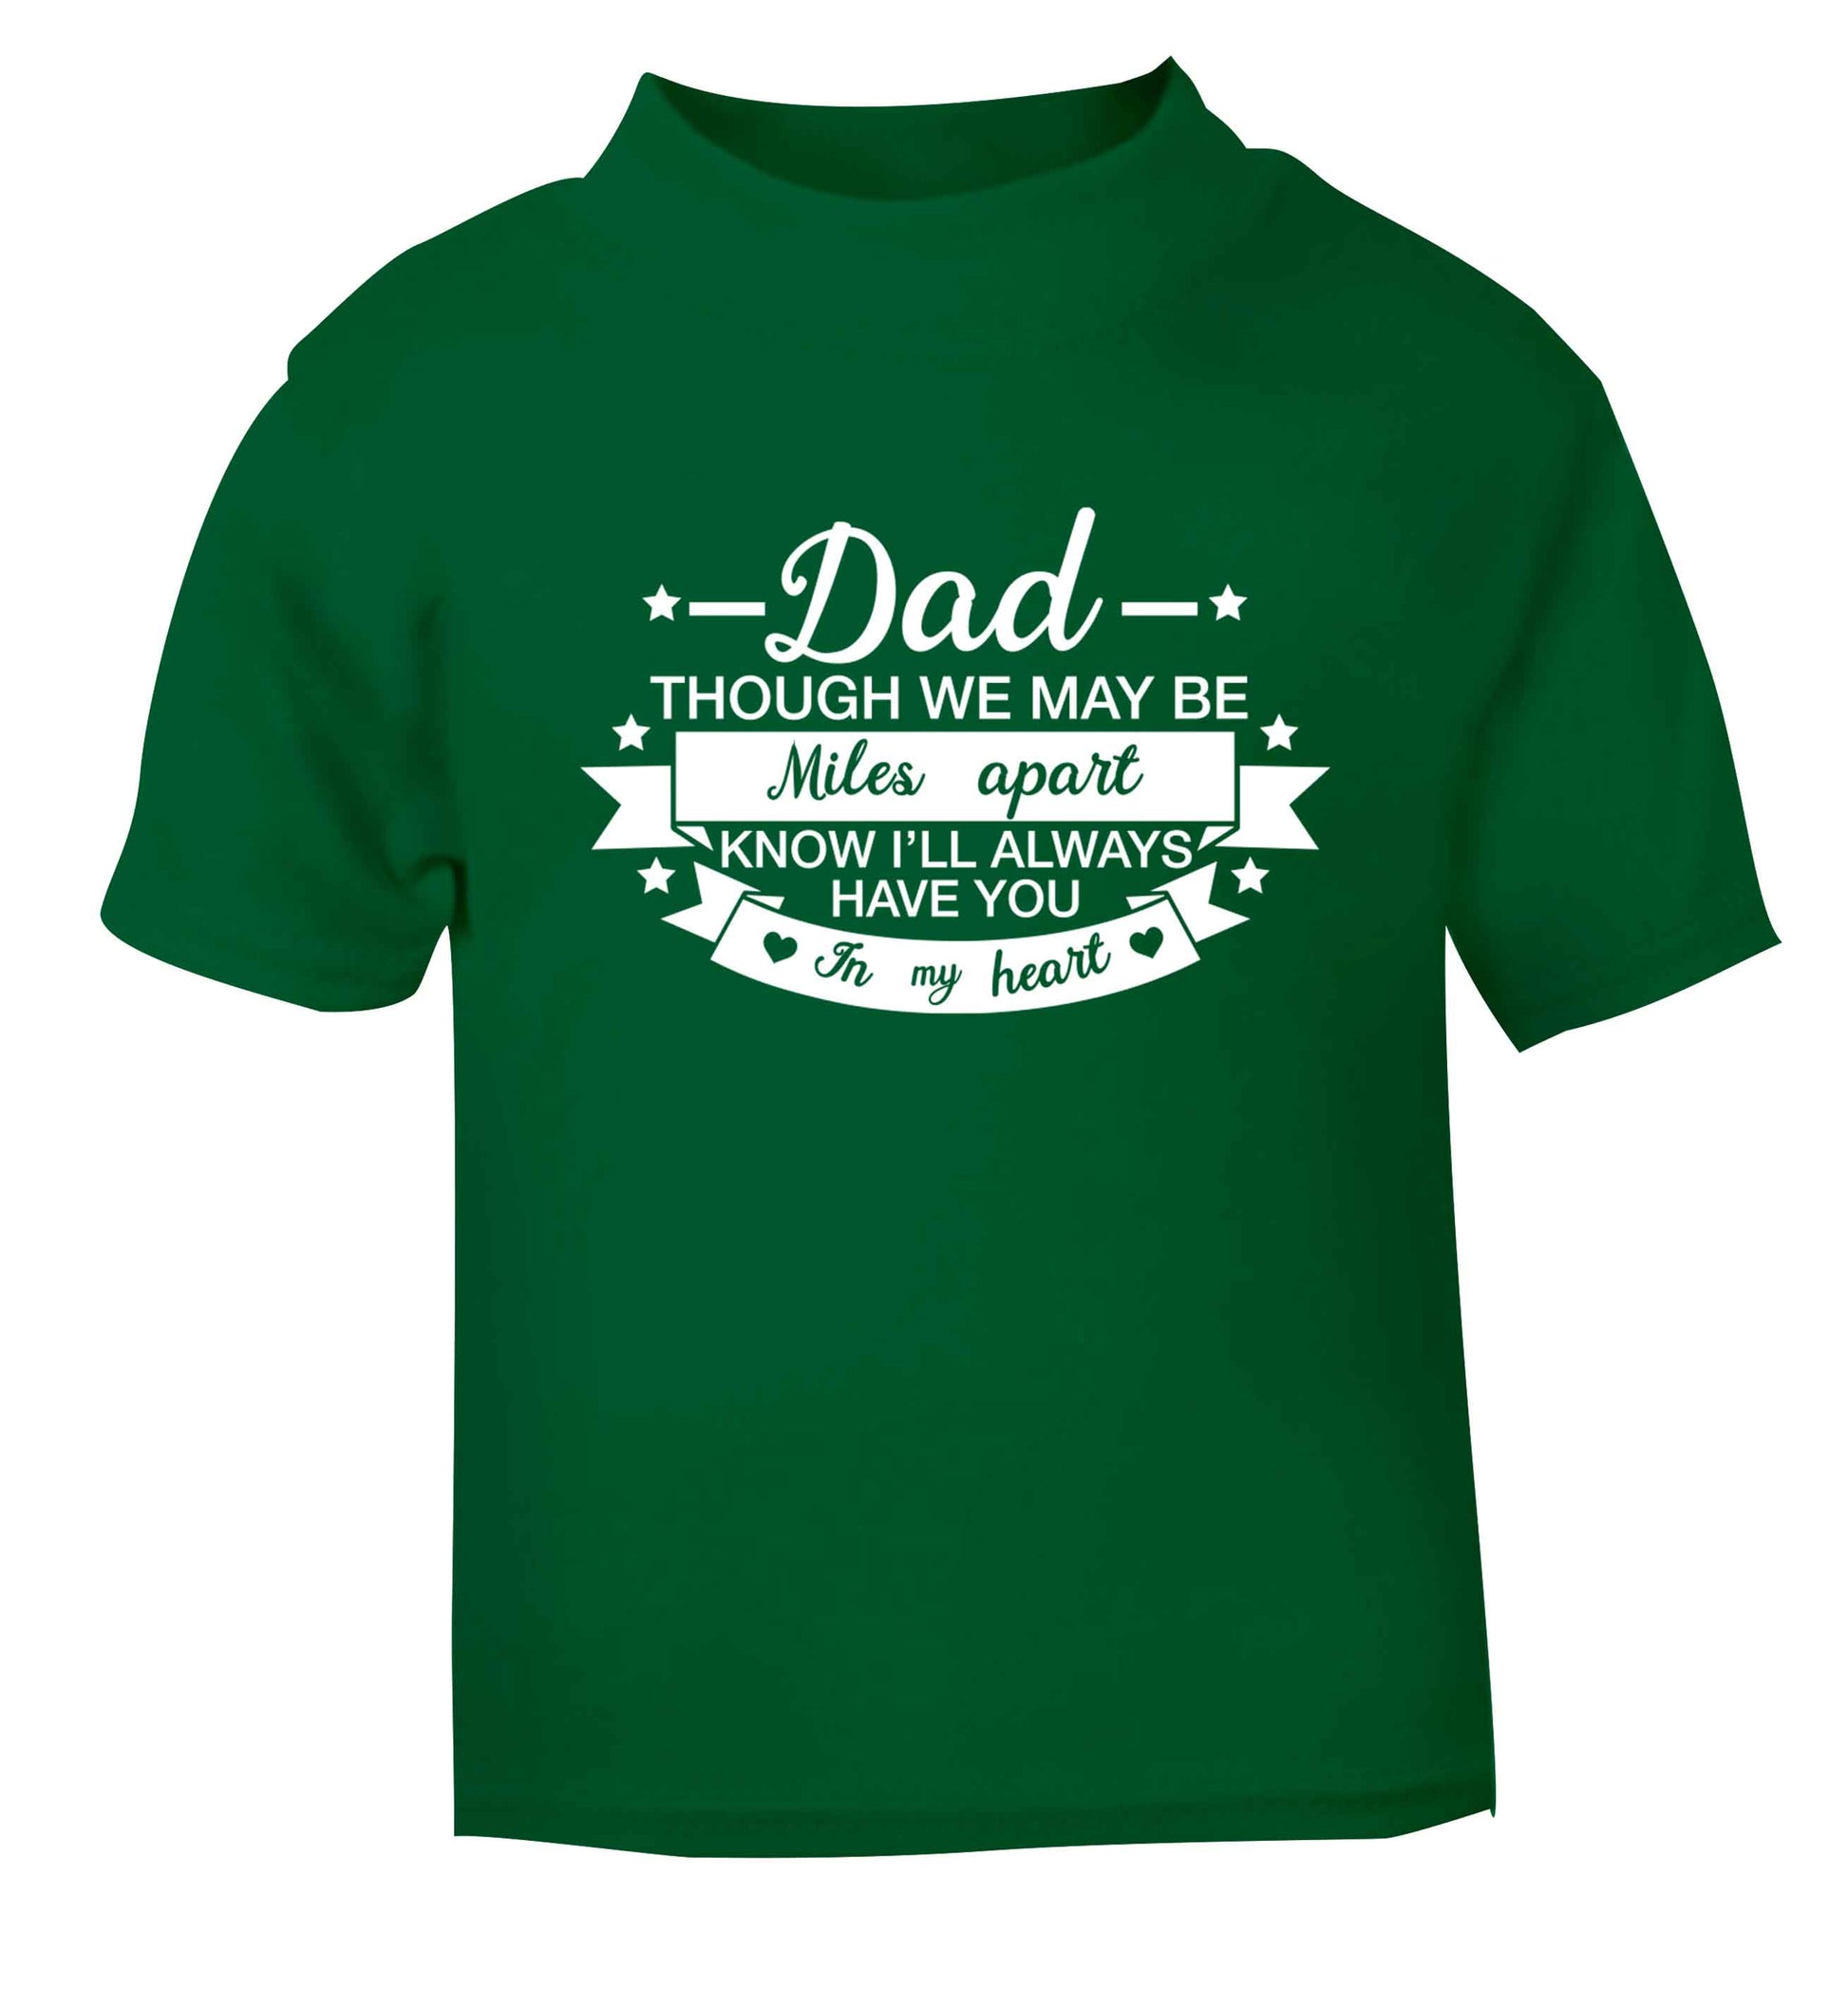 Dad though we are miles apart know I'll always have you in my heart green baby toddler Tshirt 2 Years